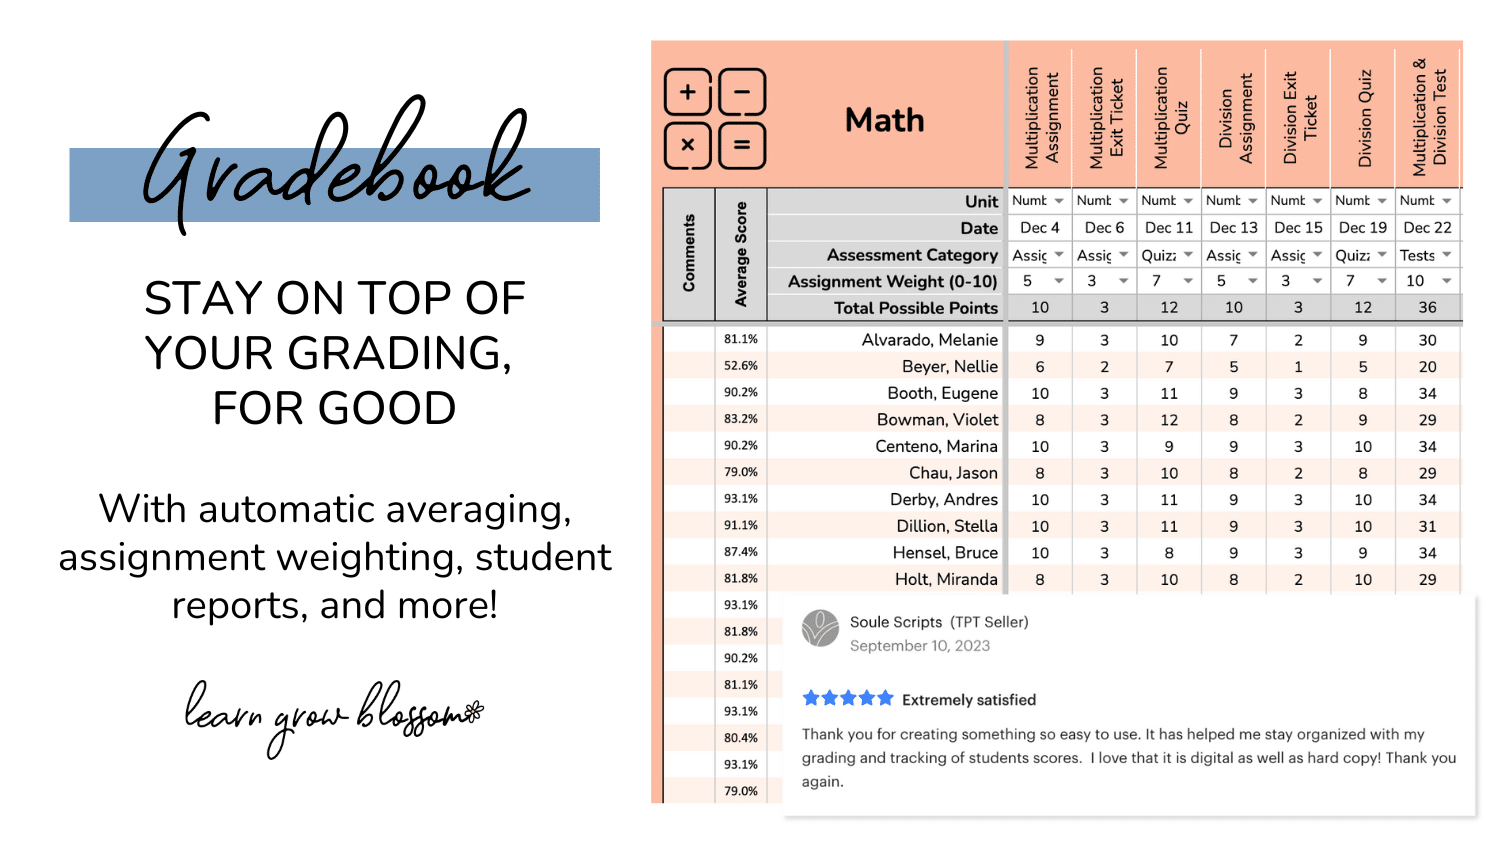 Teacher Grading Book that to help you stay on top of your teacher grading, for good with automatic averaging, assignment weighting, student reports, and more! Including a screenshot of the teacher gradebook.